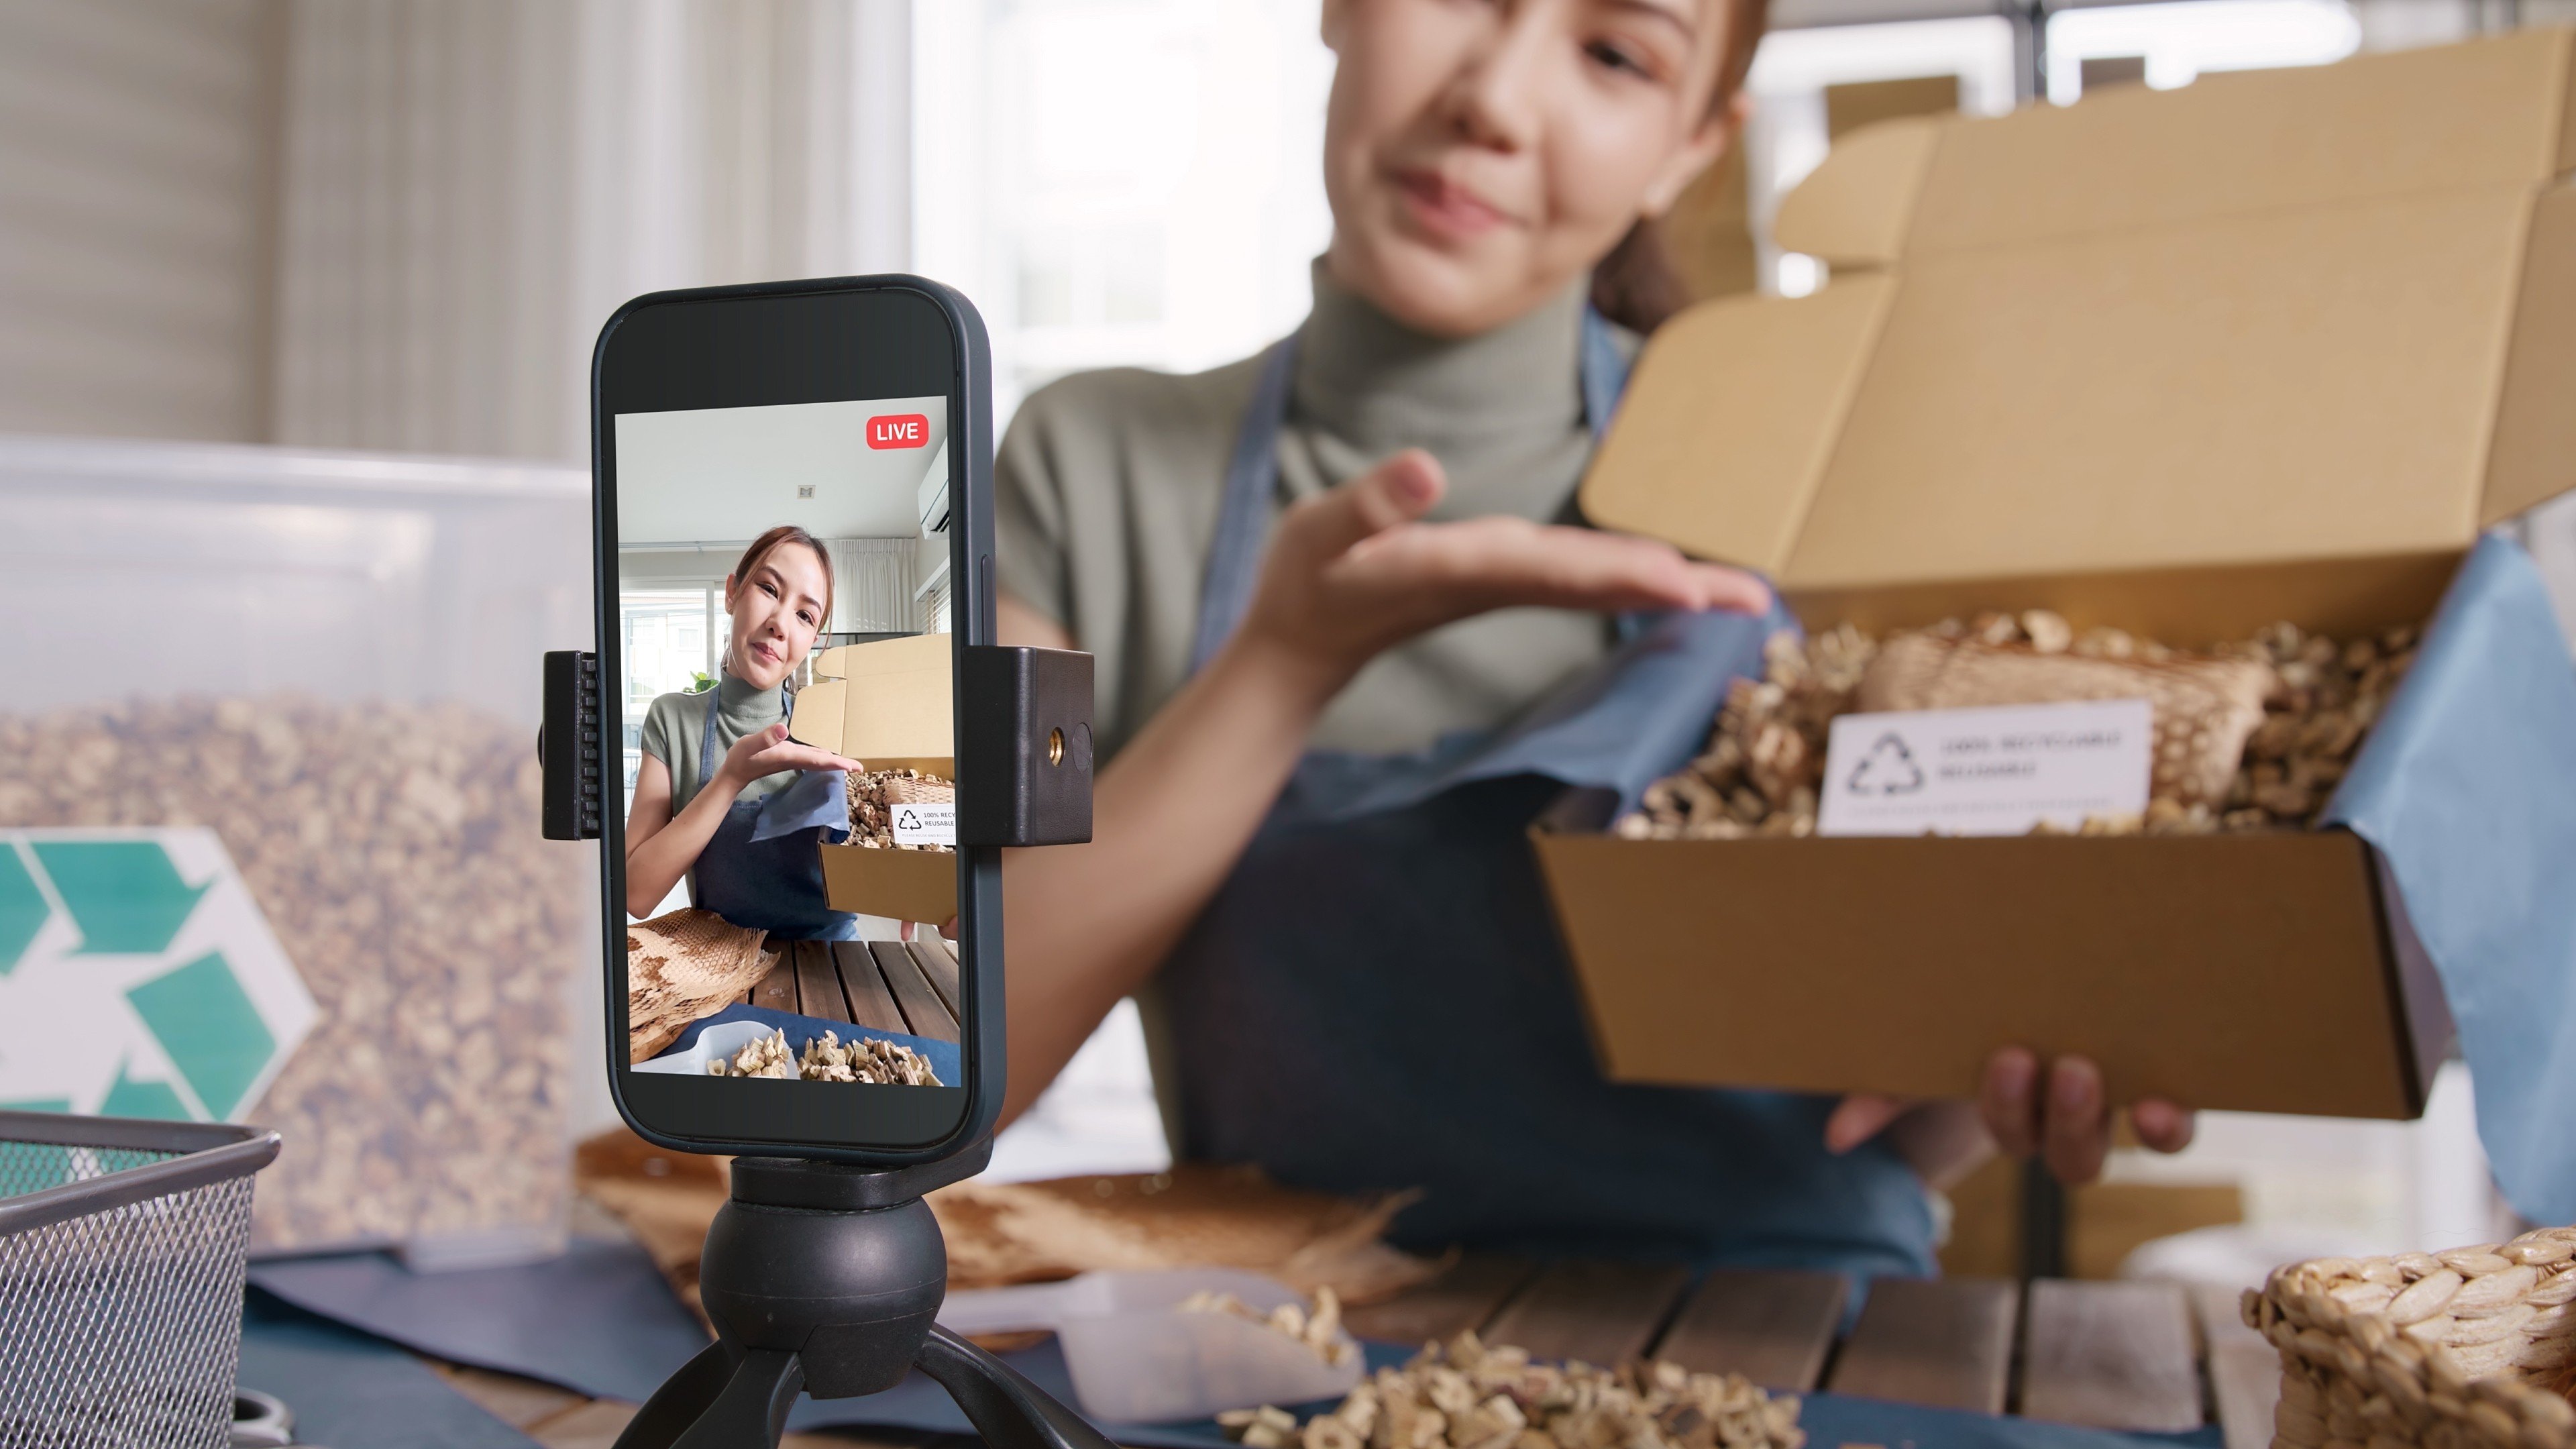 Unlike mainland China’s influencer-driven live-streaming e-commerce segment, the direct relationship between brands and consumers remains strong in markets like the United States, according to Firework. Photo: Shutterstock